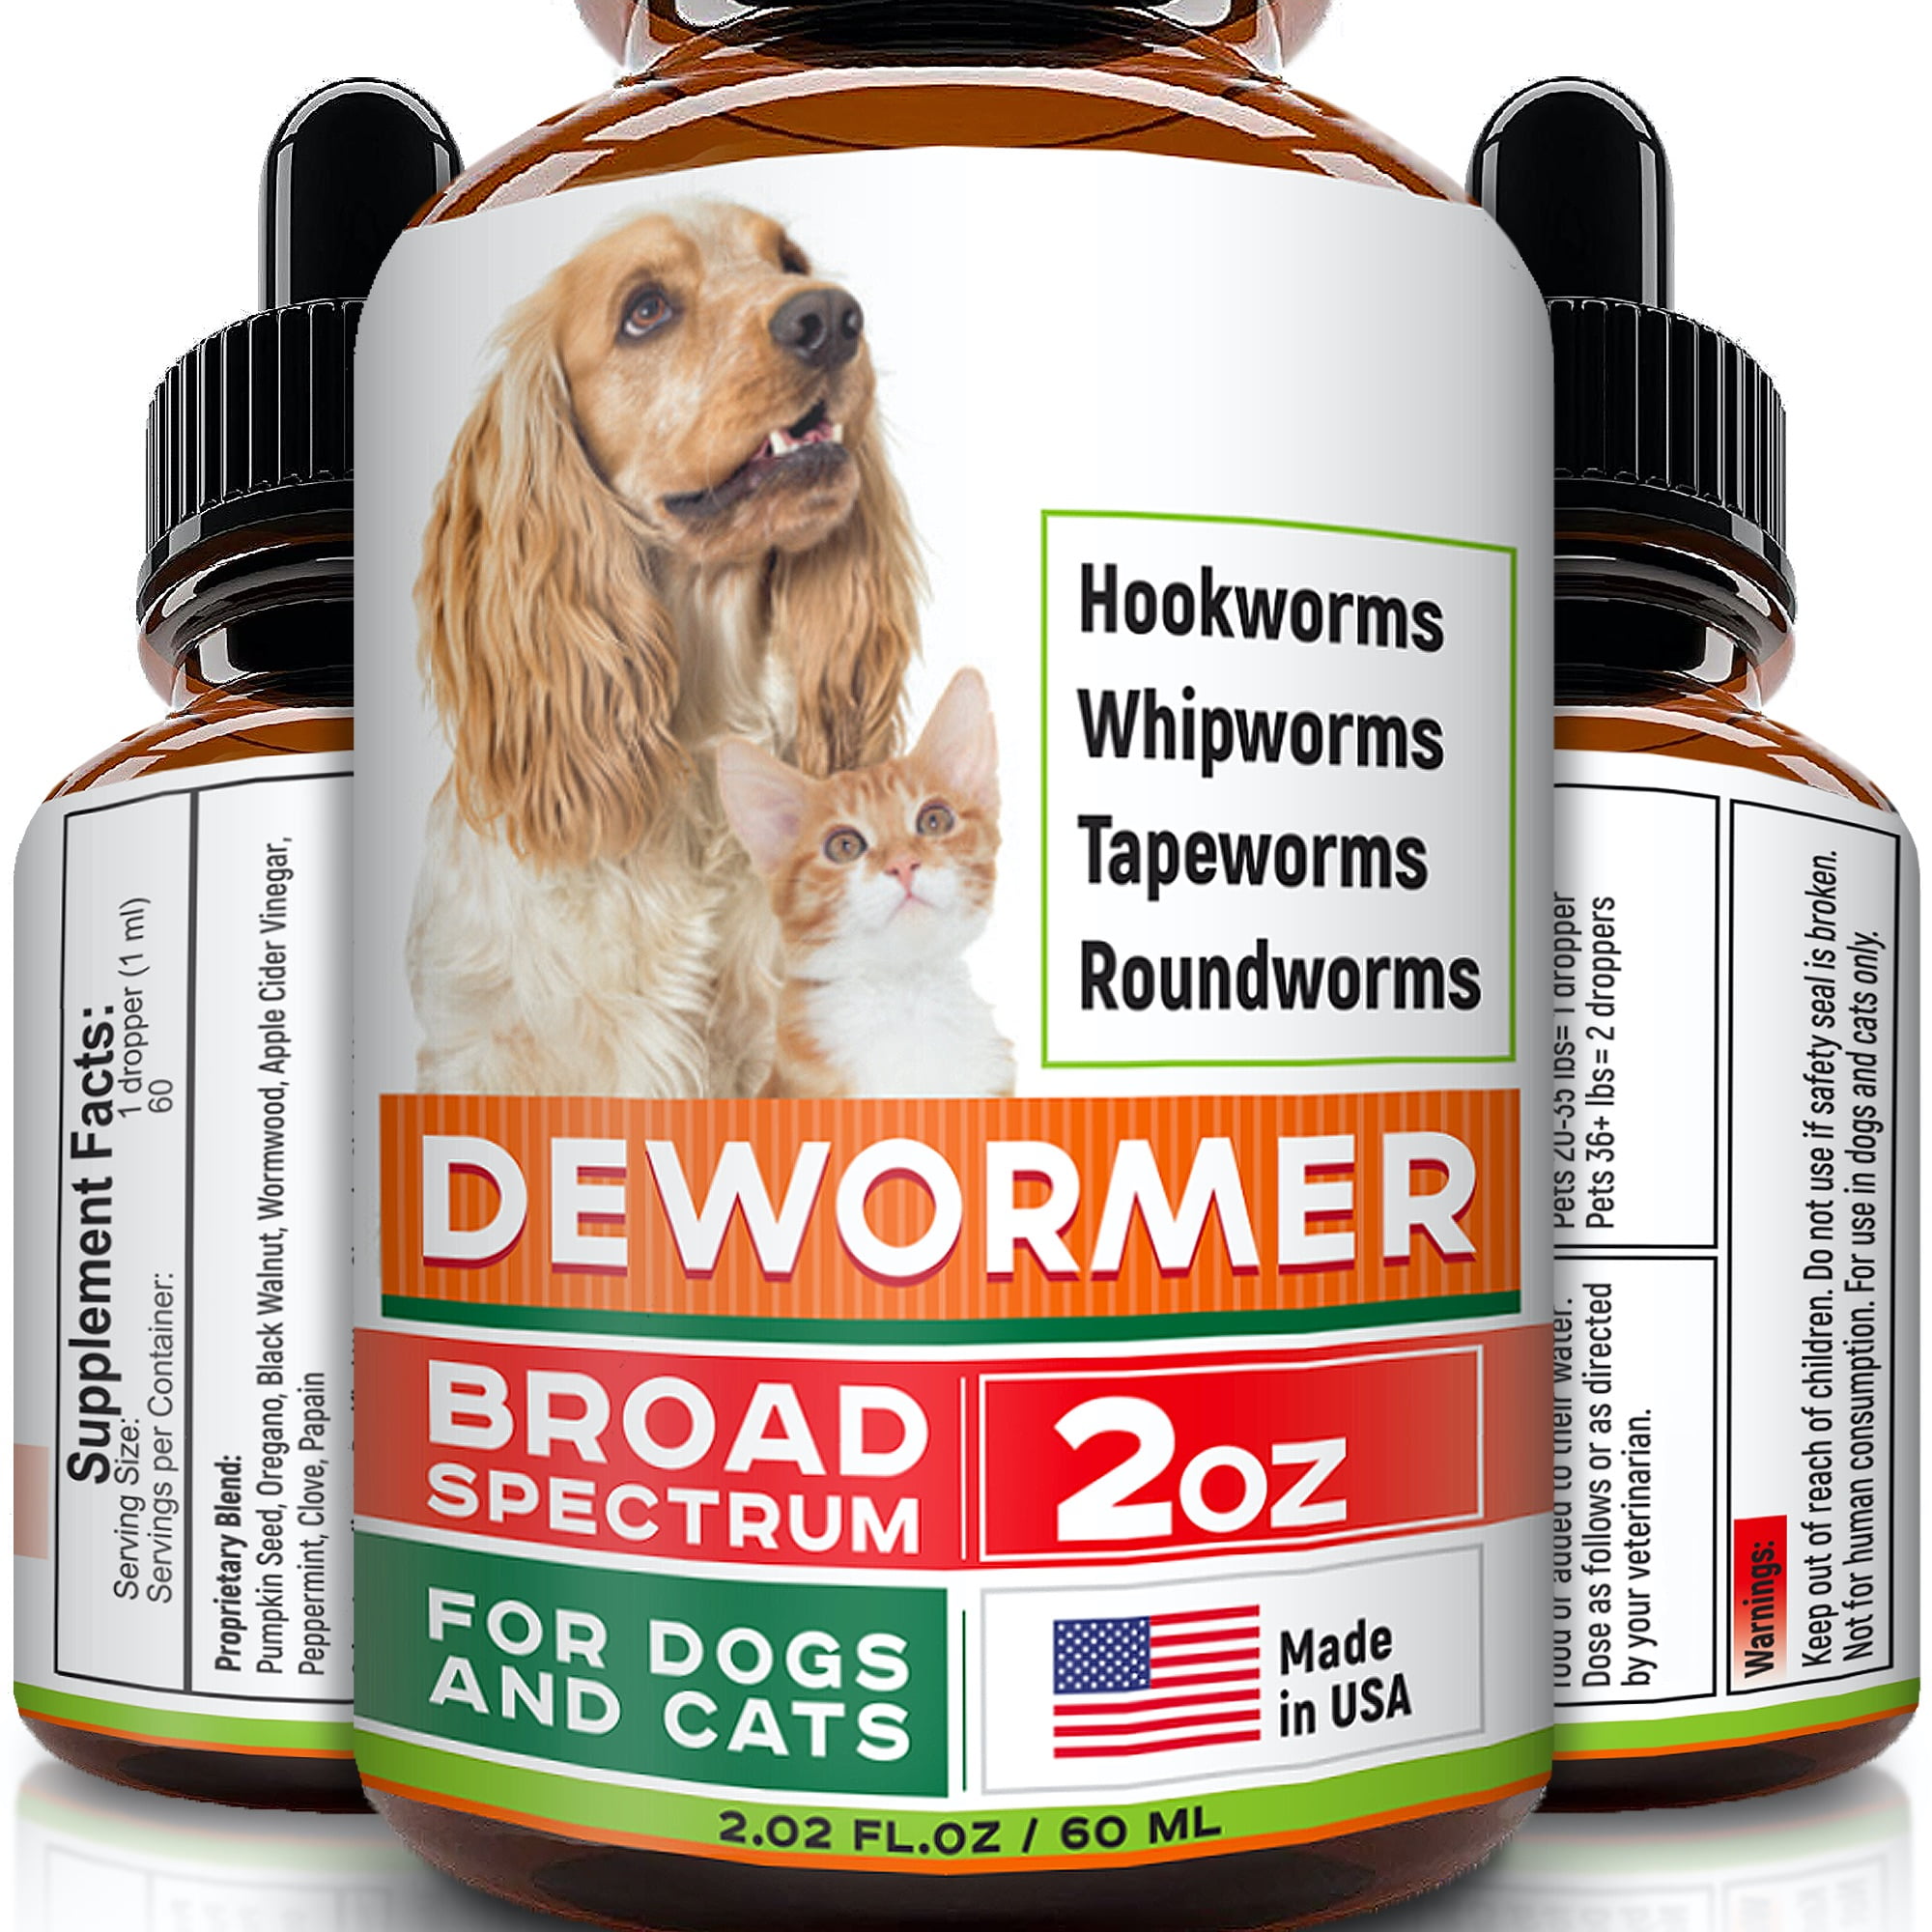 Dewormer for Dogs and Cats Made in USA Broad Spectrum Worm Treatment